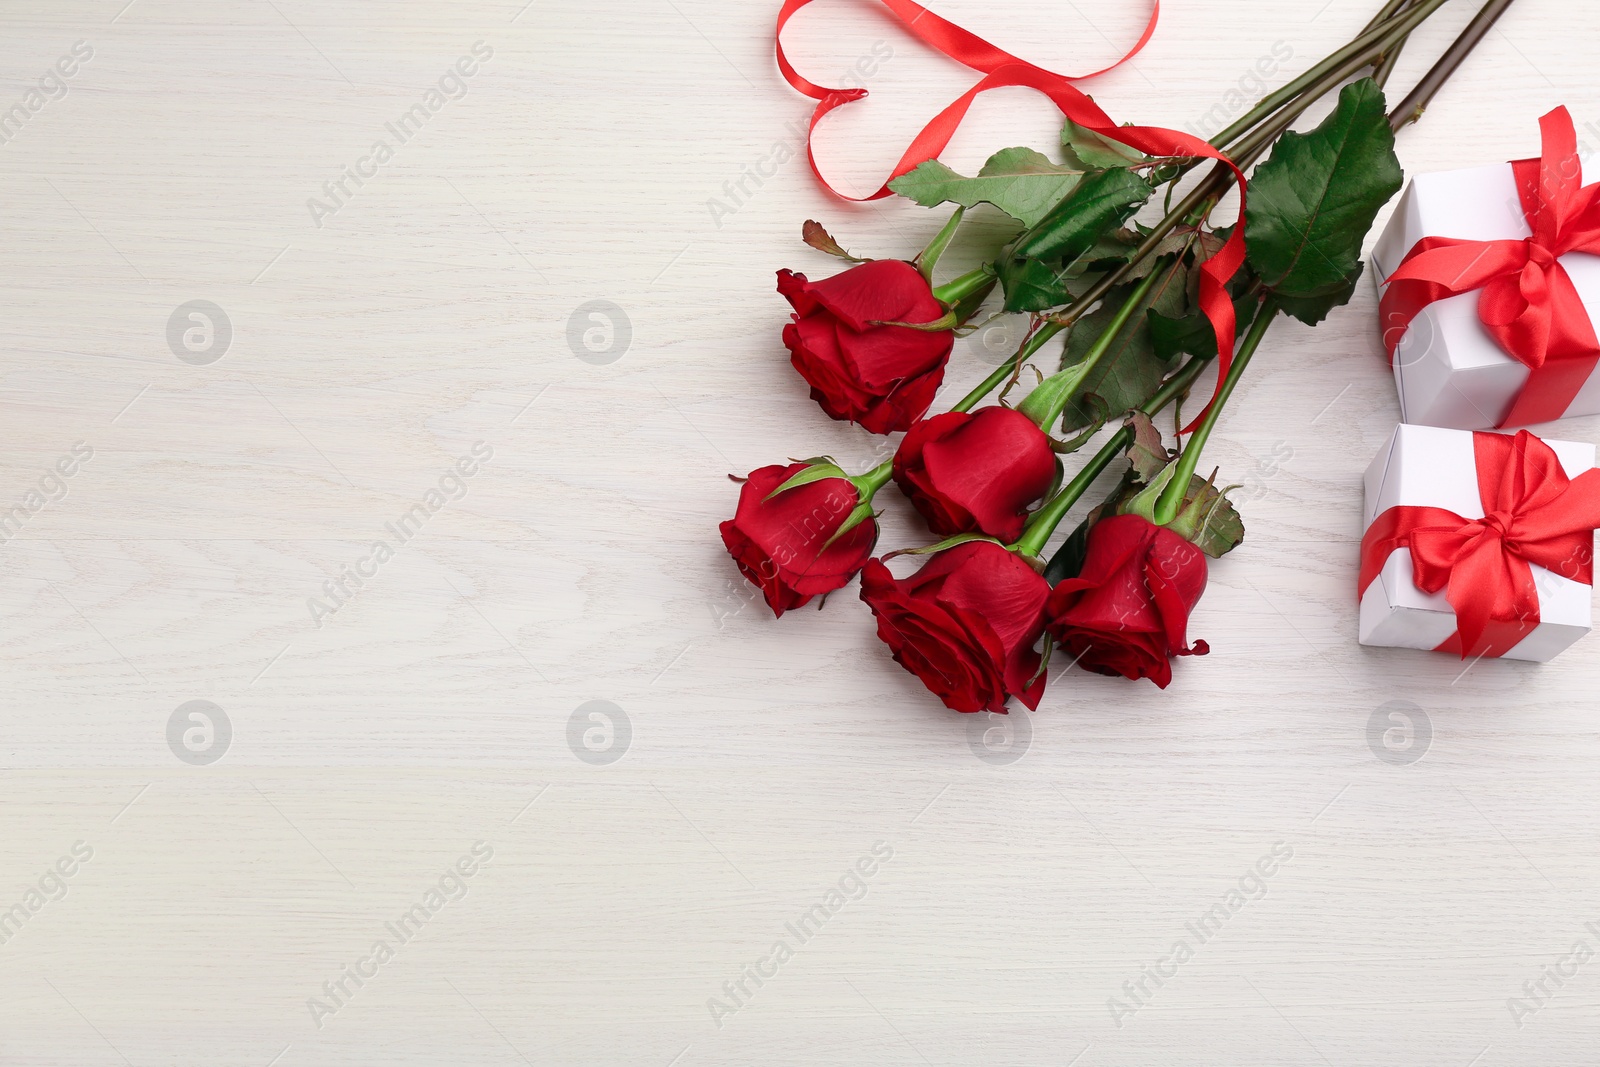 Photo of Beautiful red roses, heart shape made of ribbon and gift boxes on white wooden background, flat lay with space for text. Valentine's Day celebration